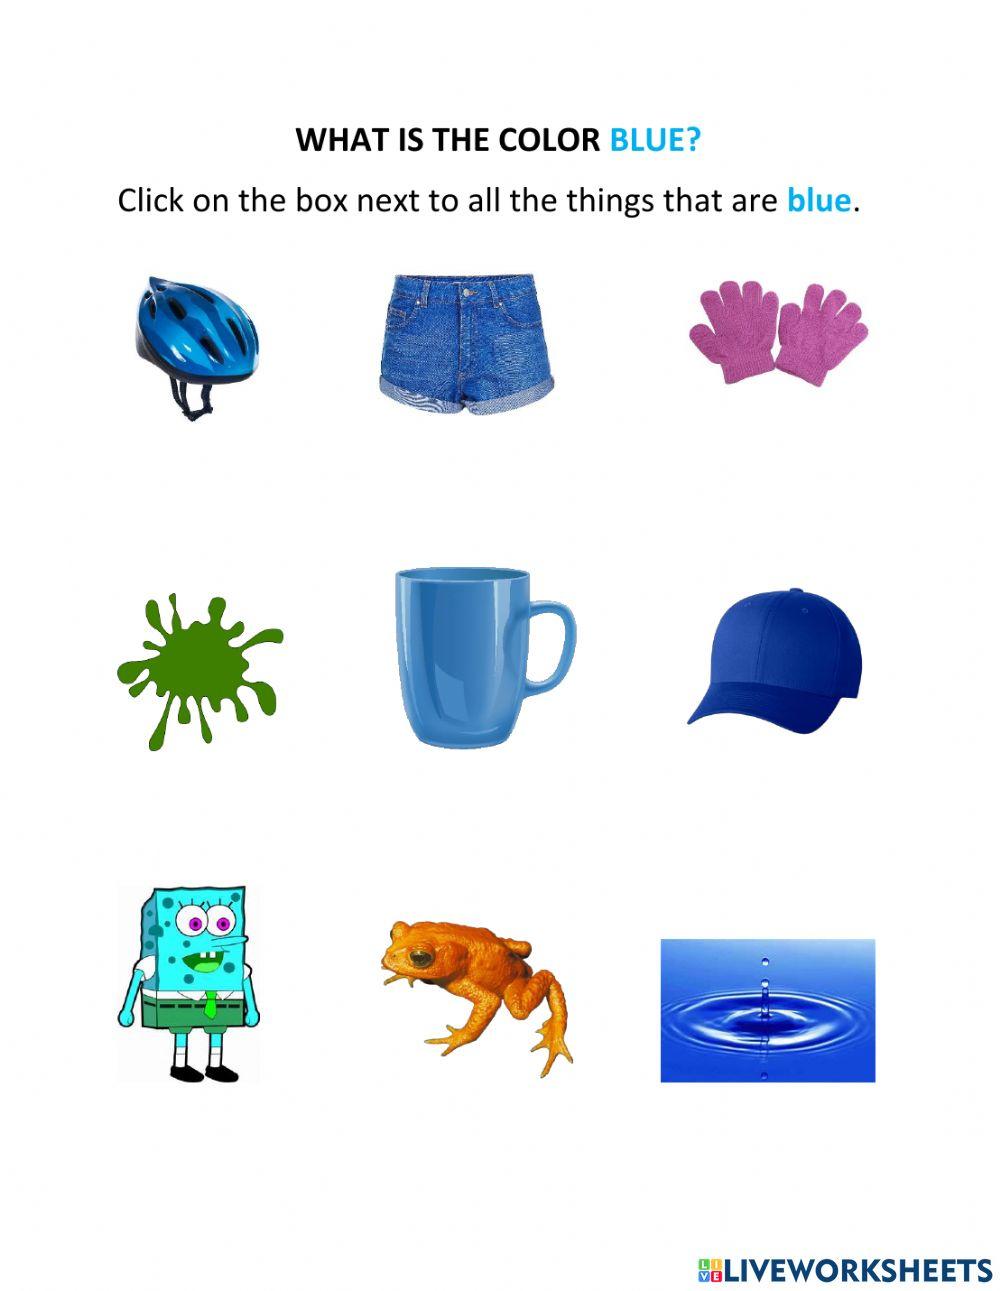 What is the Color Blue?